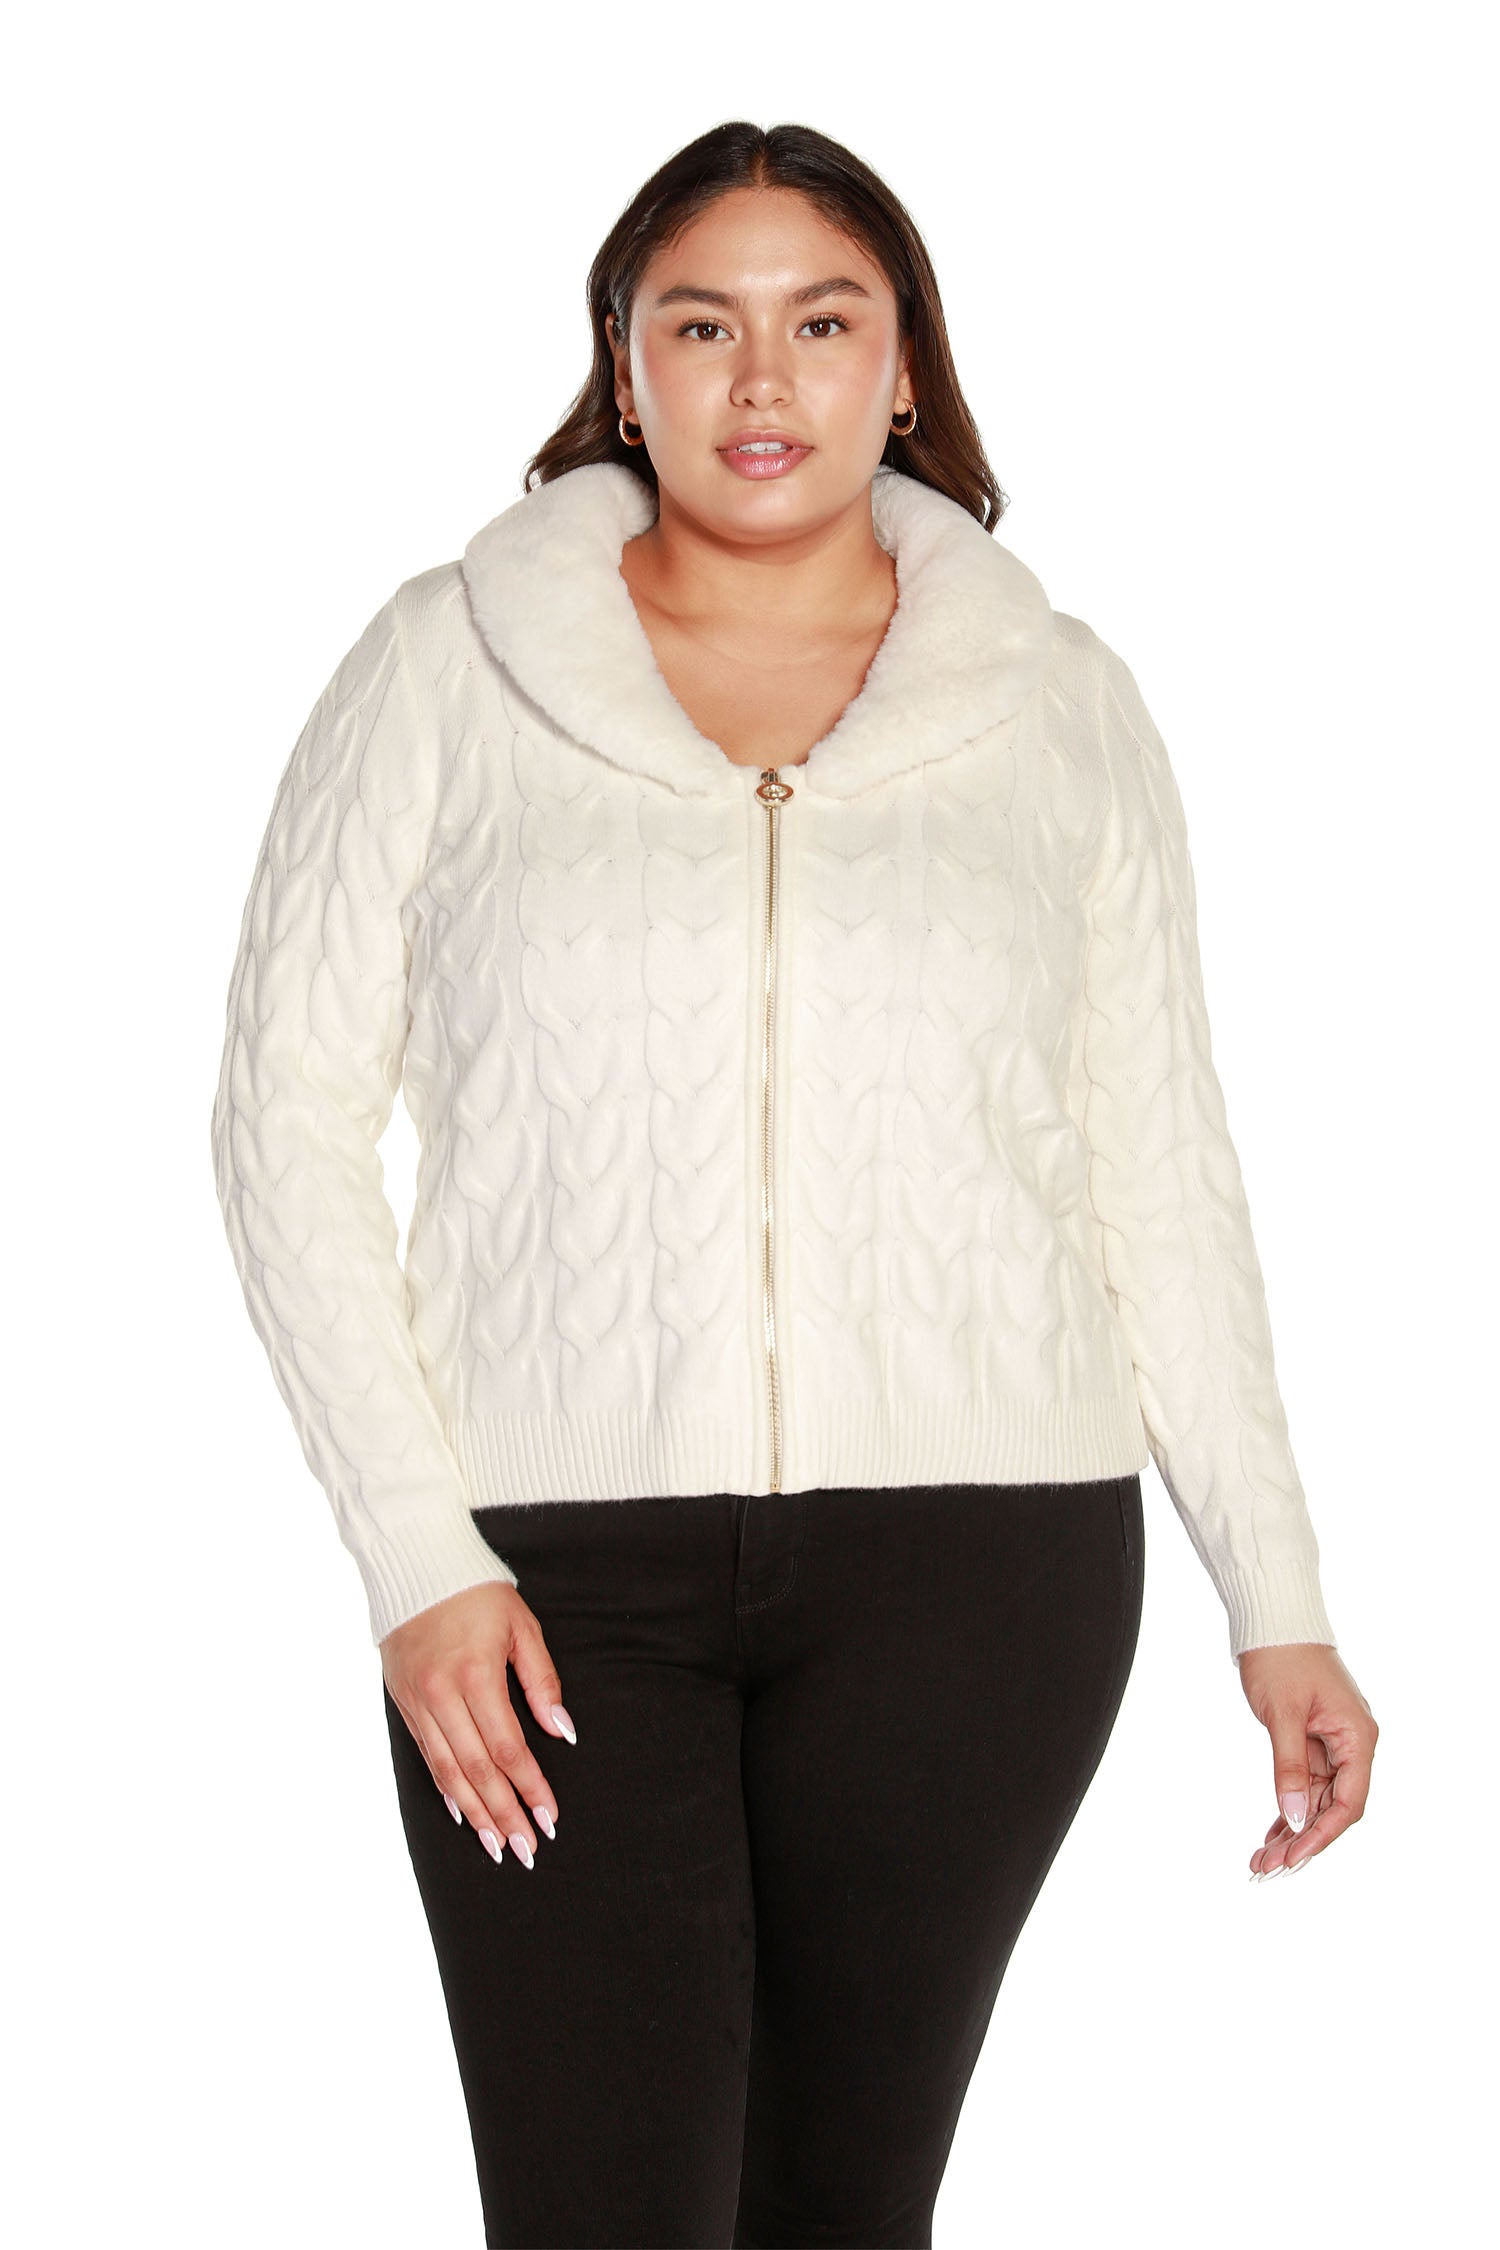 Women's Zip Front Cable Knit Cardigan Sweater with Faux Fur Collar | Curvy